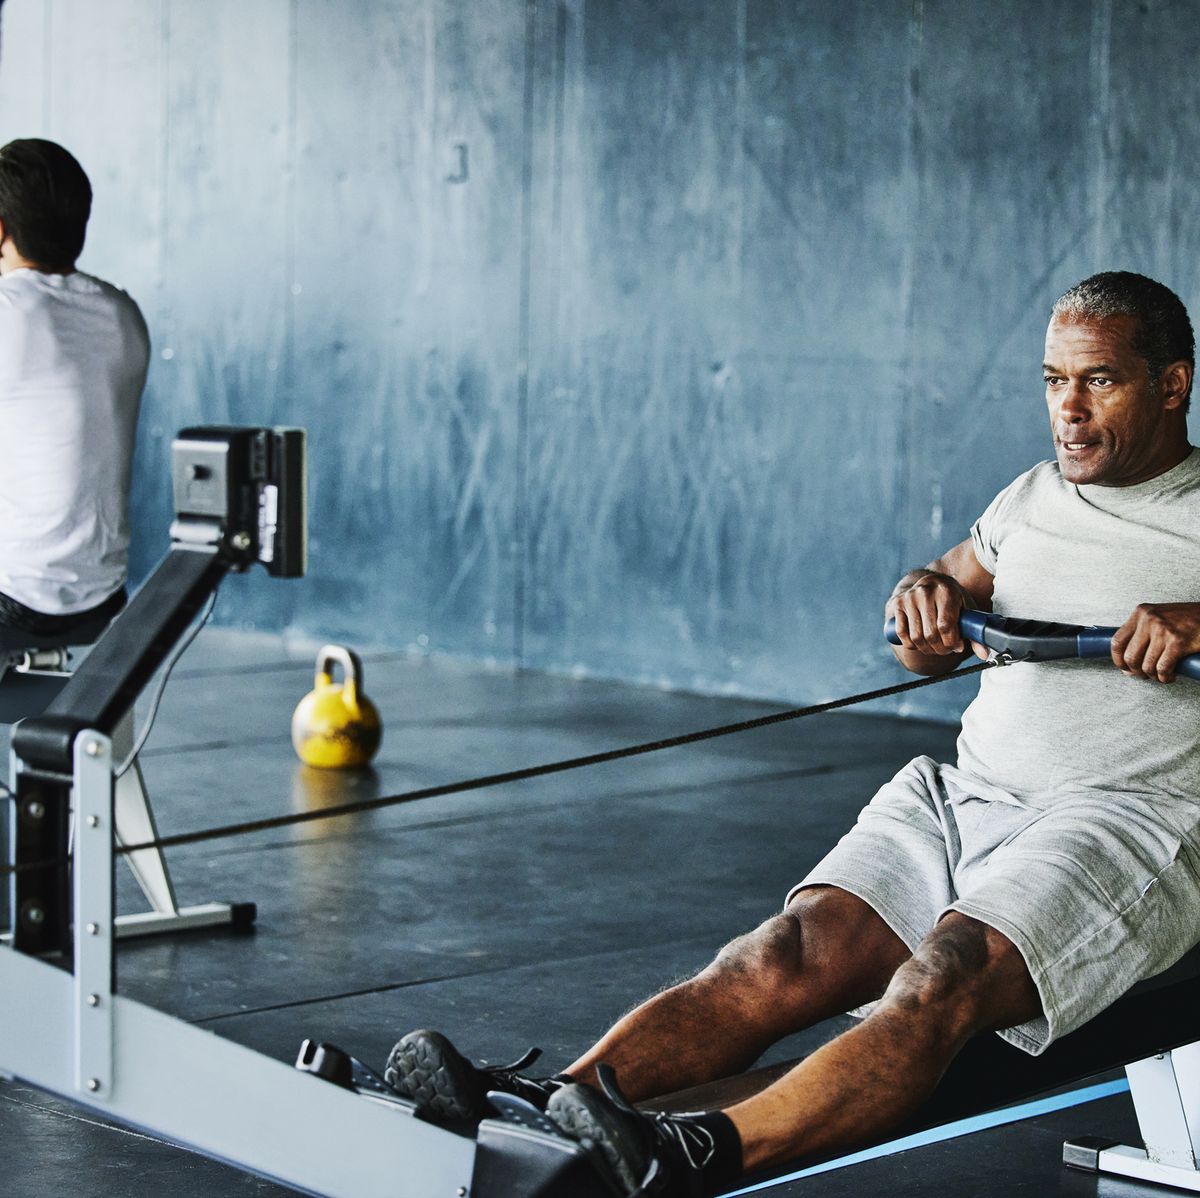 Total Row Fitness - The Benefits of Rowing